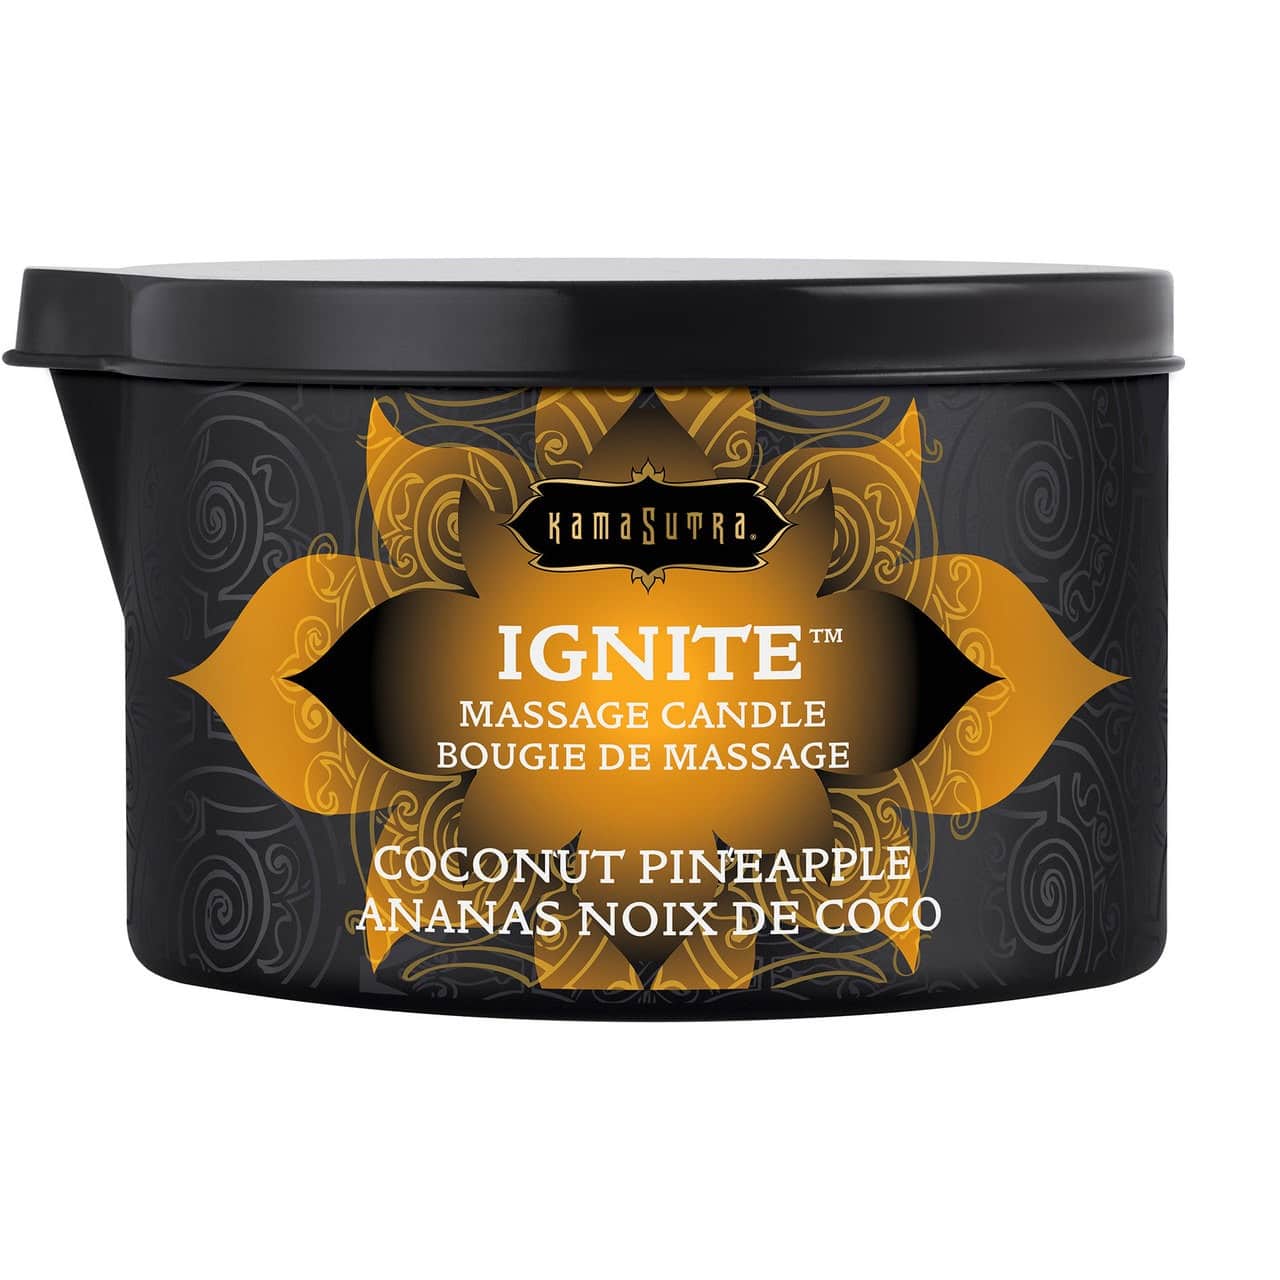 Product Kama Sutra Ignite Massage Oil Candle Coconut & Pineapple